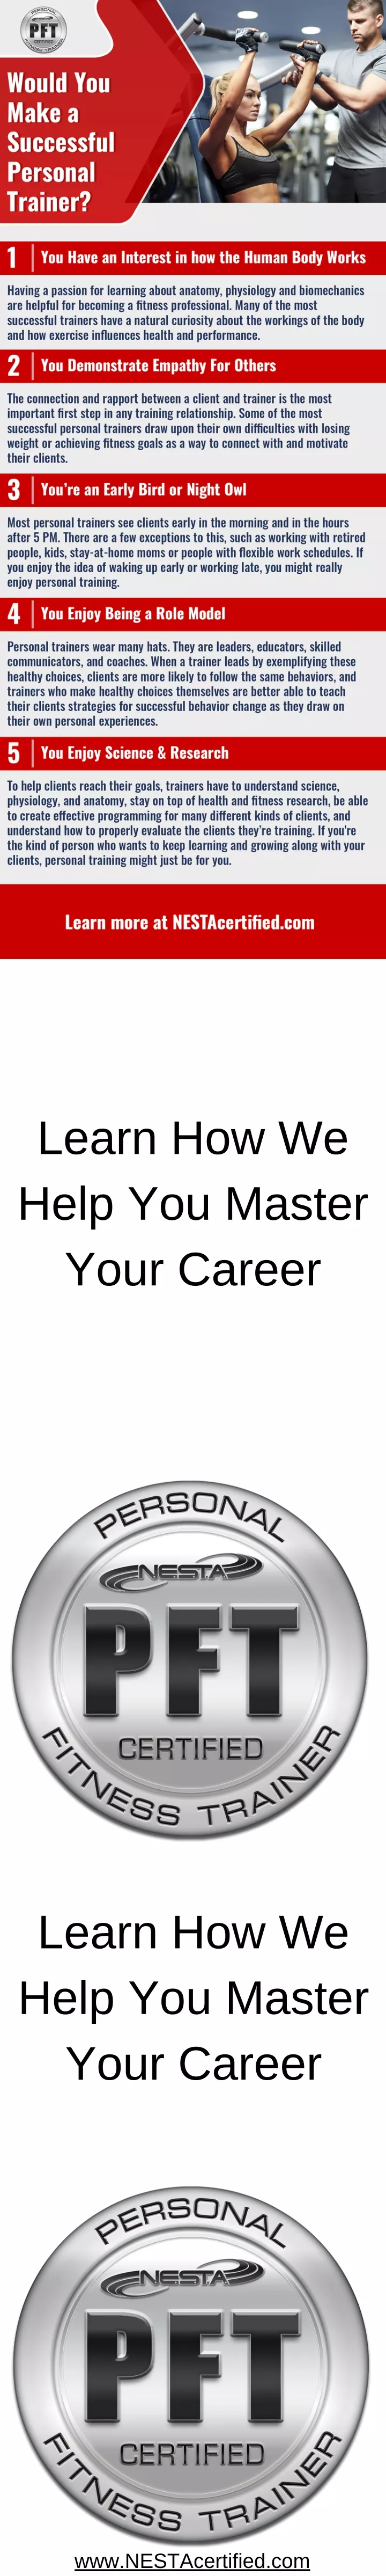 learn how we help you master your career